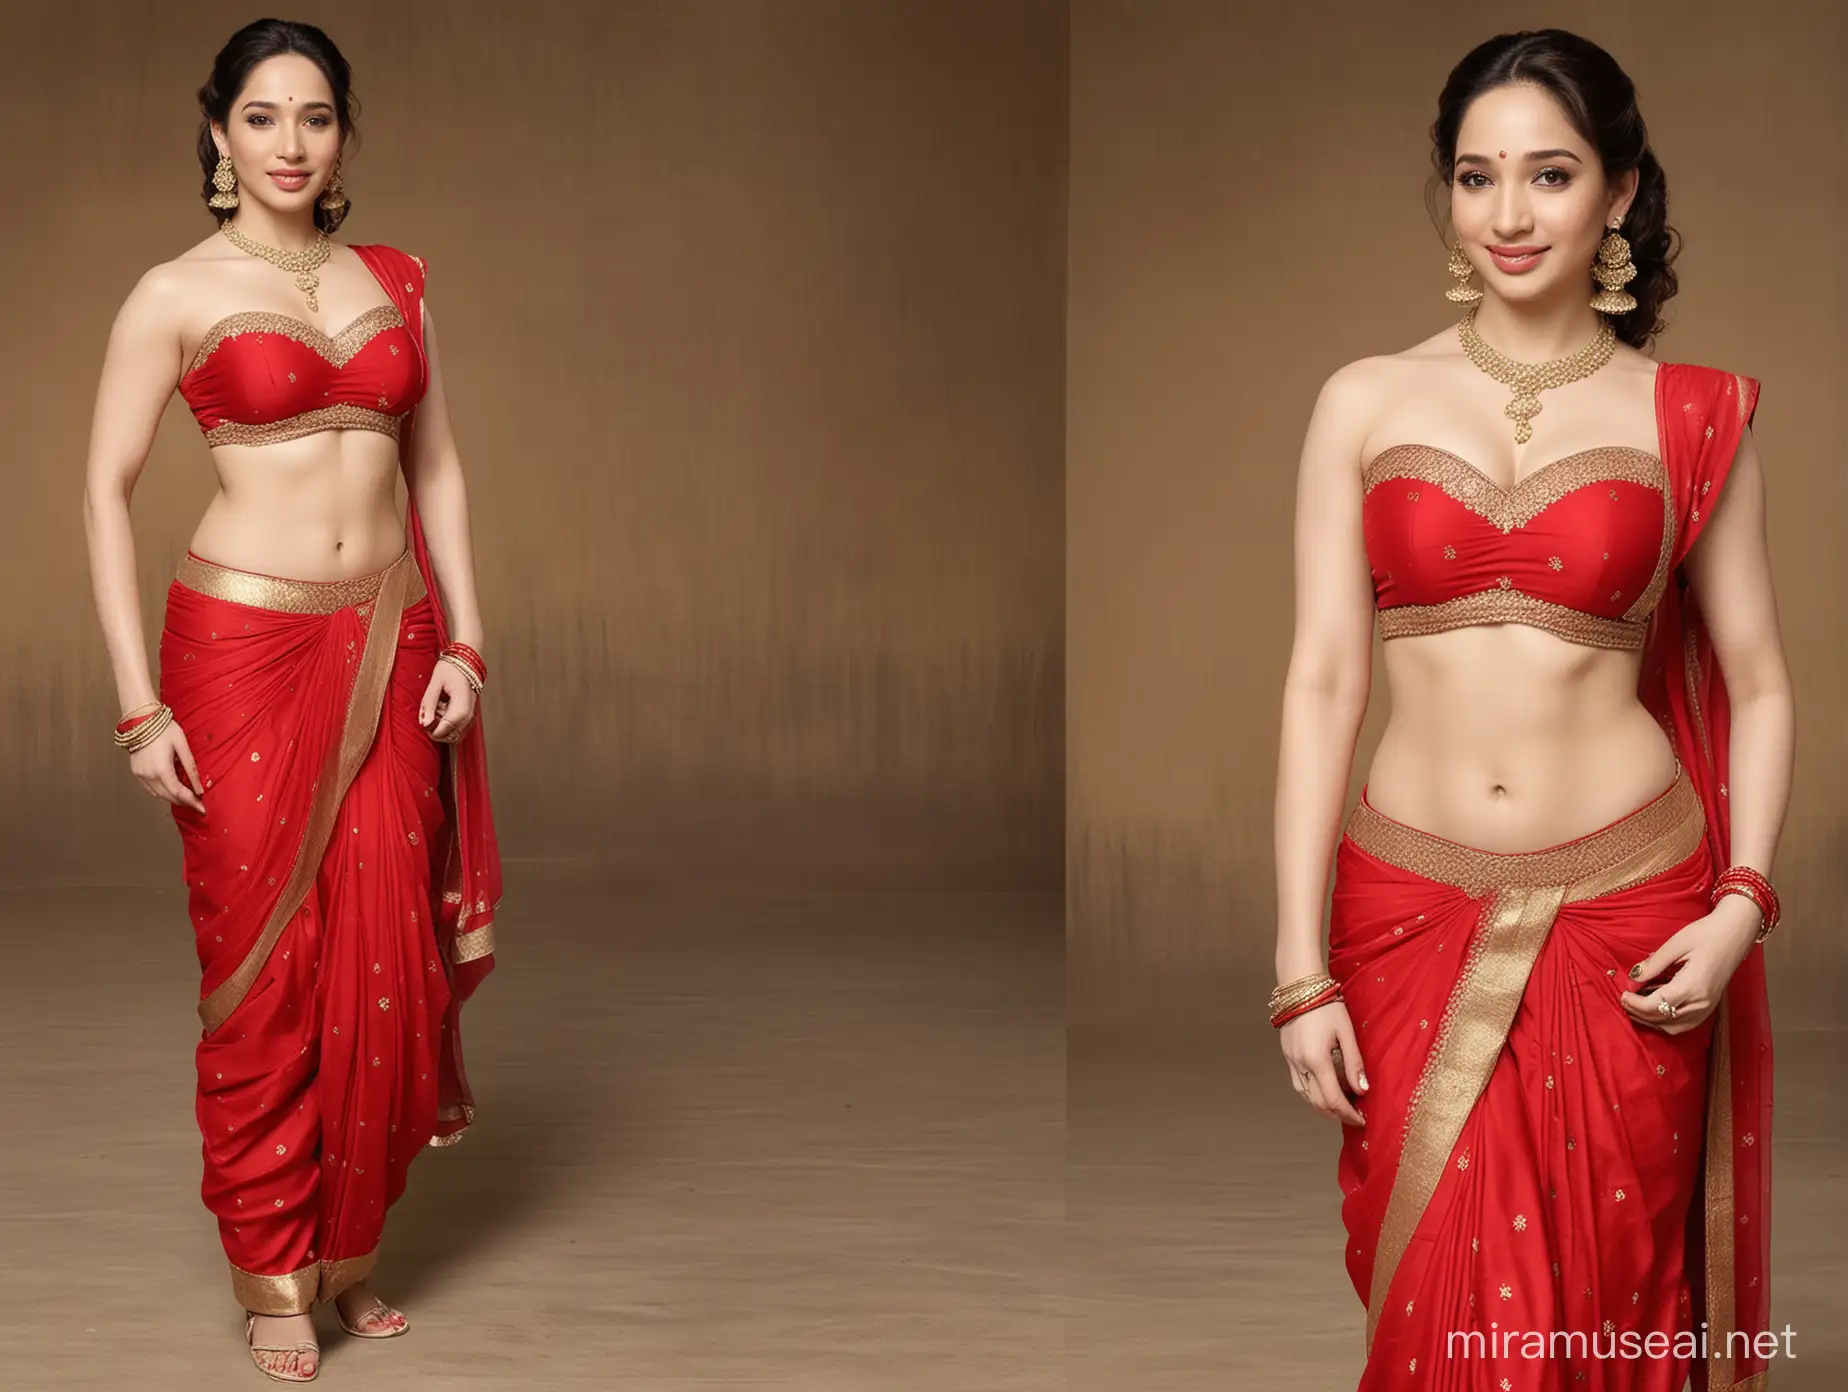 generate an image of Tamannah Bhatia wearing traditional bandeau red lingerie, red saree and red Indian Sheer dhoti, with appropriate accessories such as bangles, armlets and a bindi, while maintaining her recognizable features and elegance.. full body image.